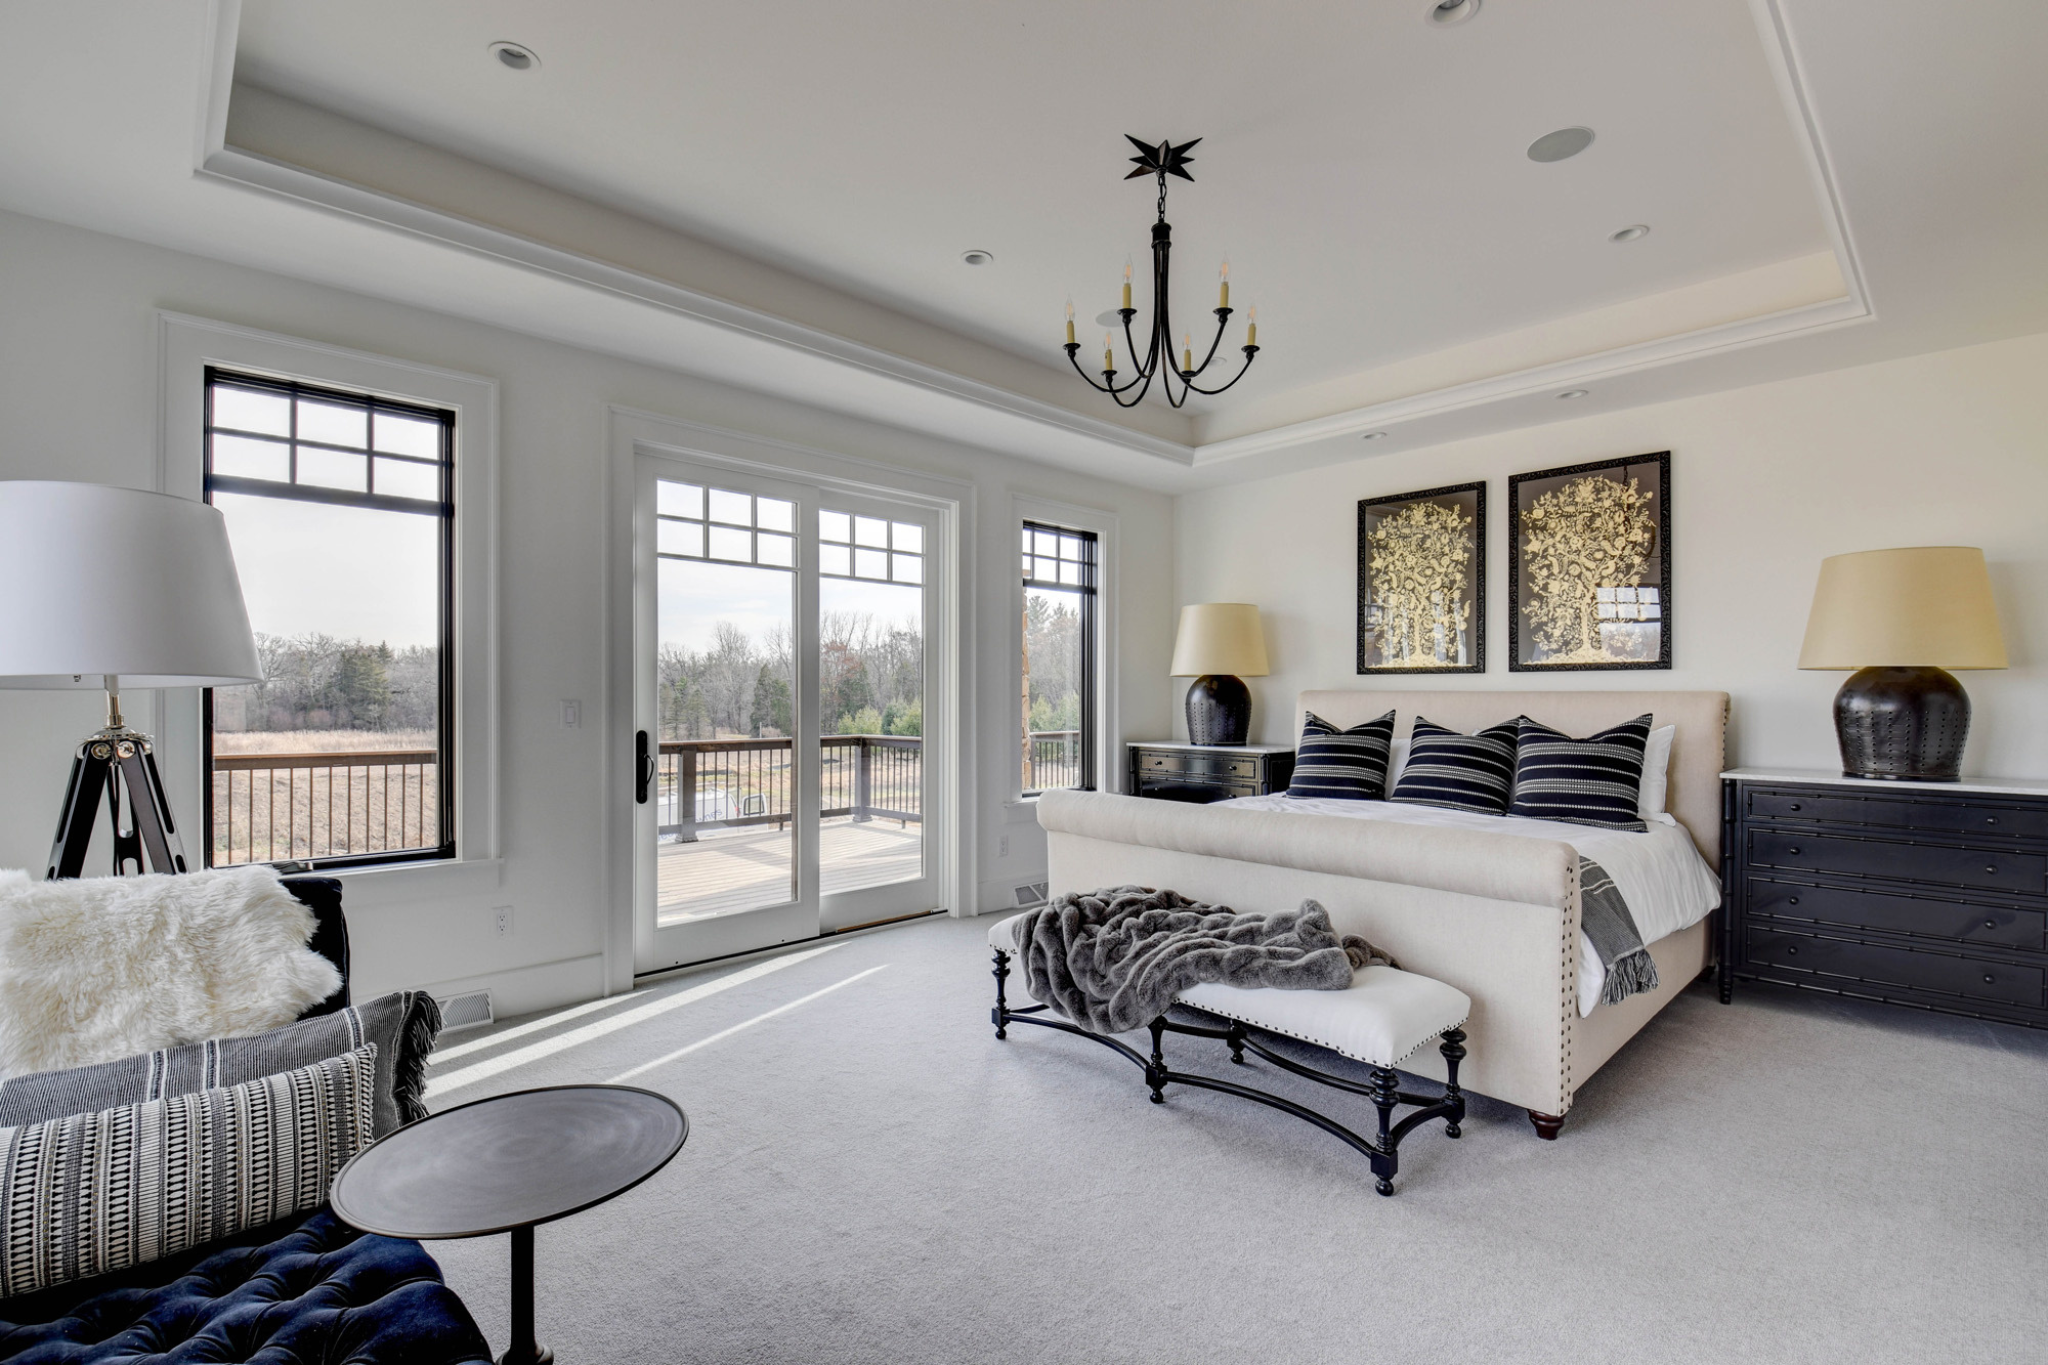 Luxurious bedroom with balcony access in a custom-built Pewaukee home.